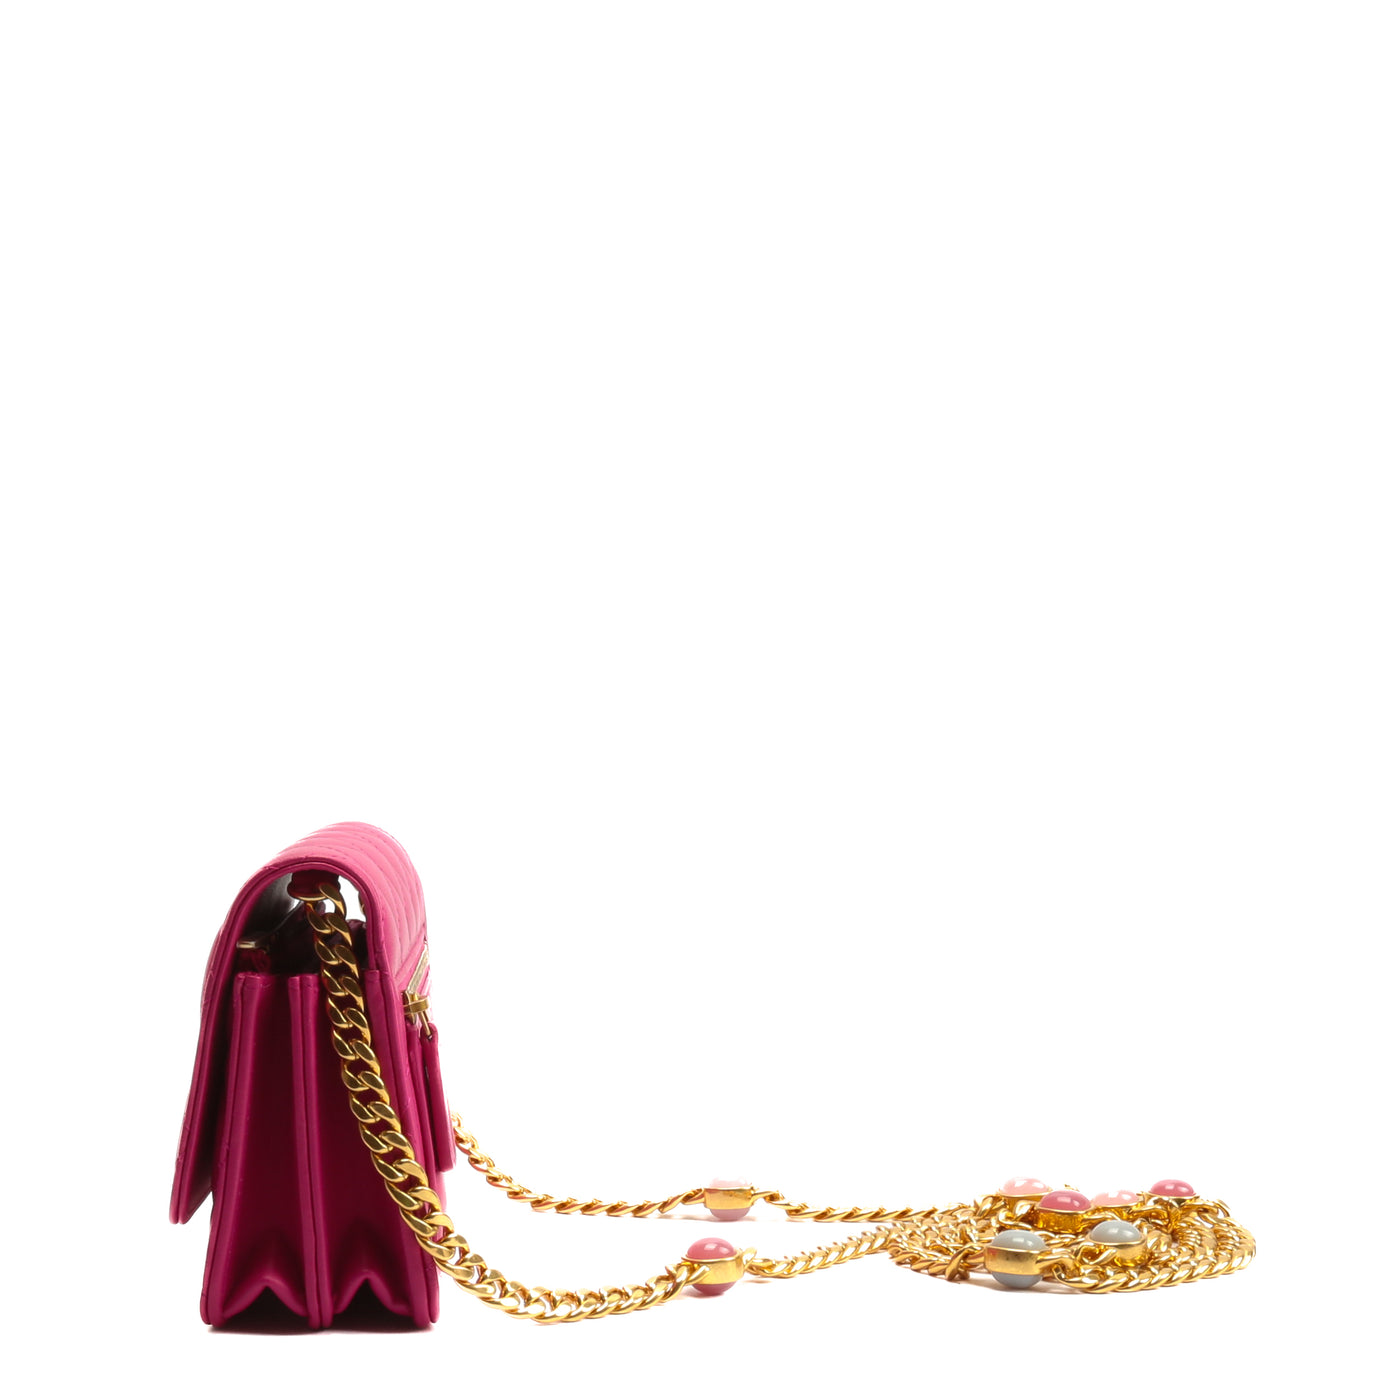 CHANEL Mini Candy Wallet On Chain - Fuchsia Pink